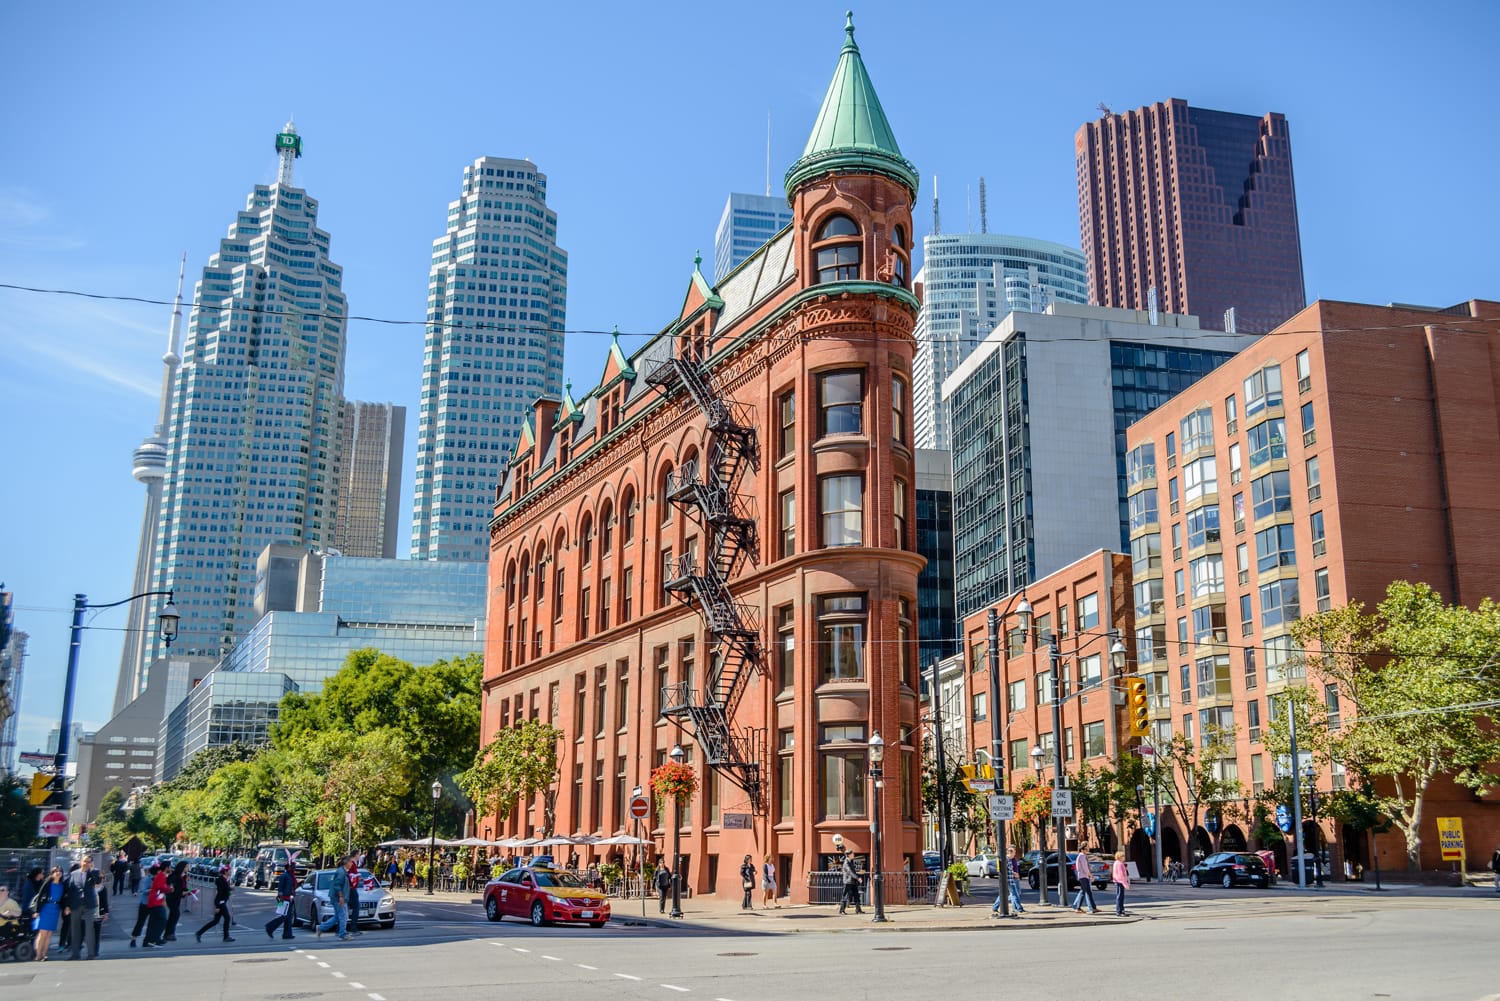 People walk in the Gooderham building area, a Victorian historic building surrounded by the financial district in Toronto, Canada